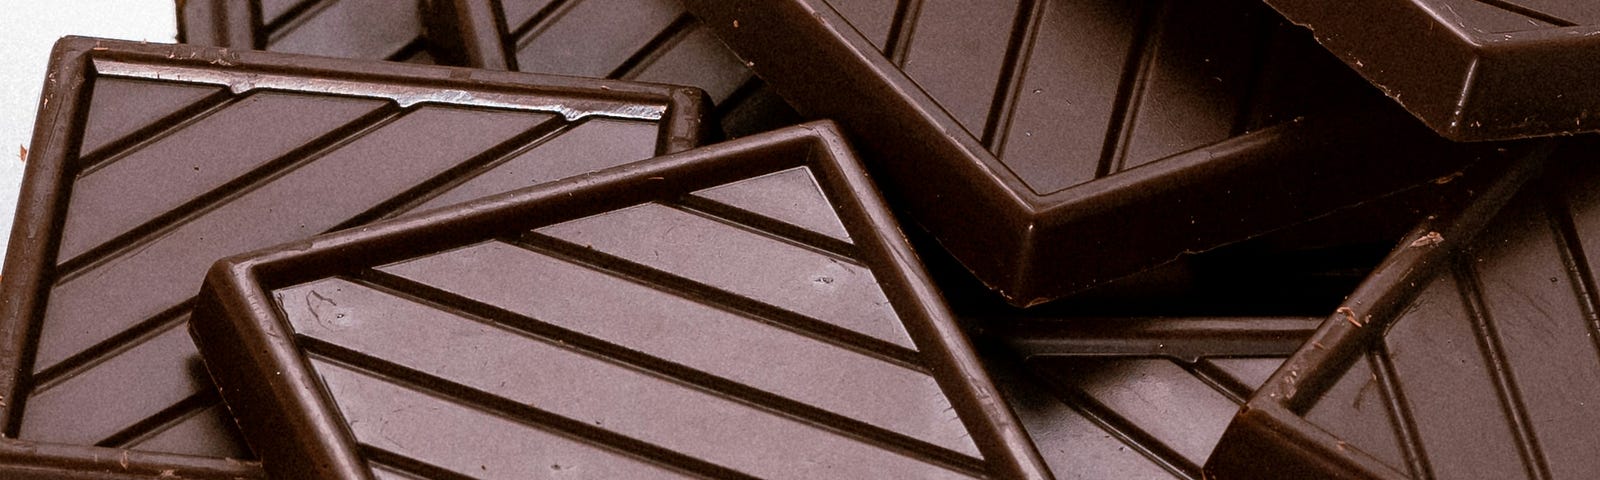 squares of chocolate on a metal plate